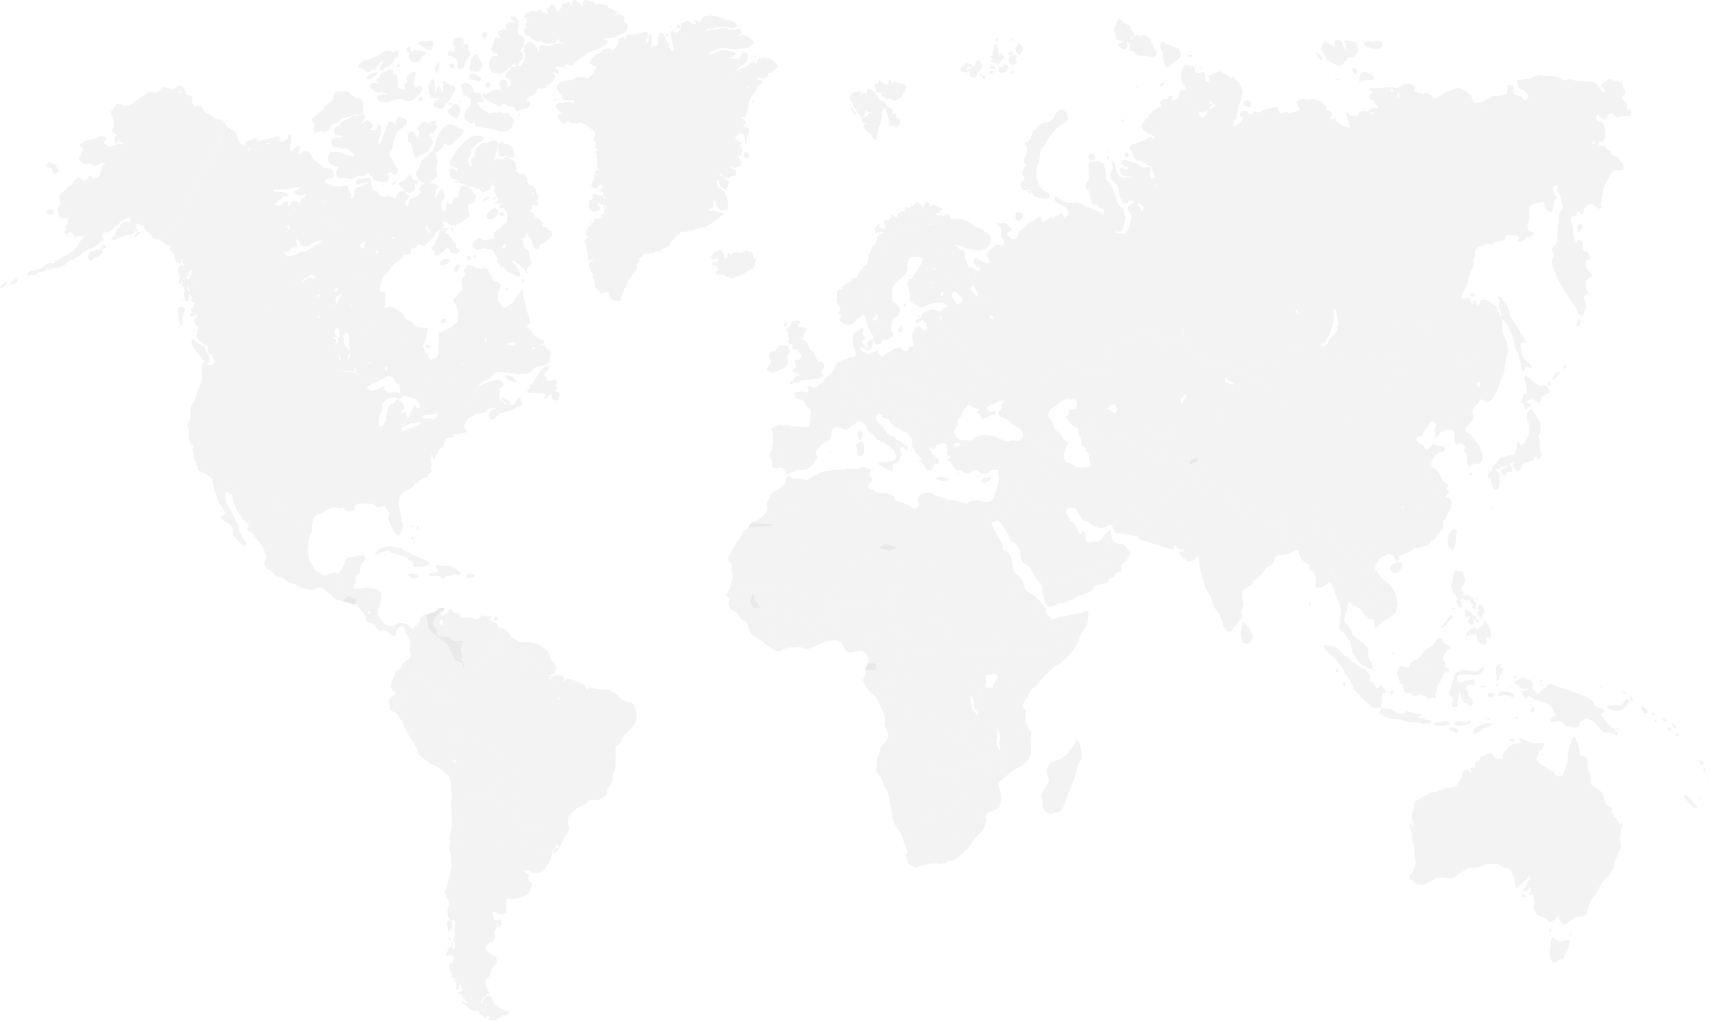 Image of a world map.